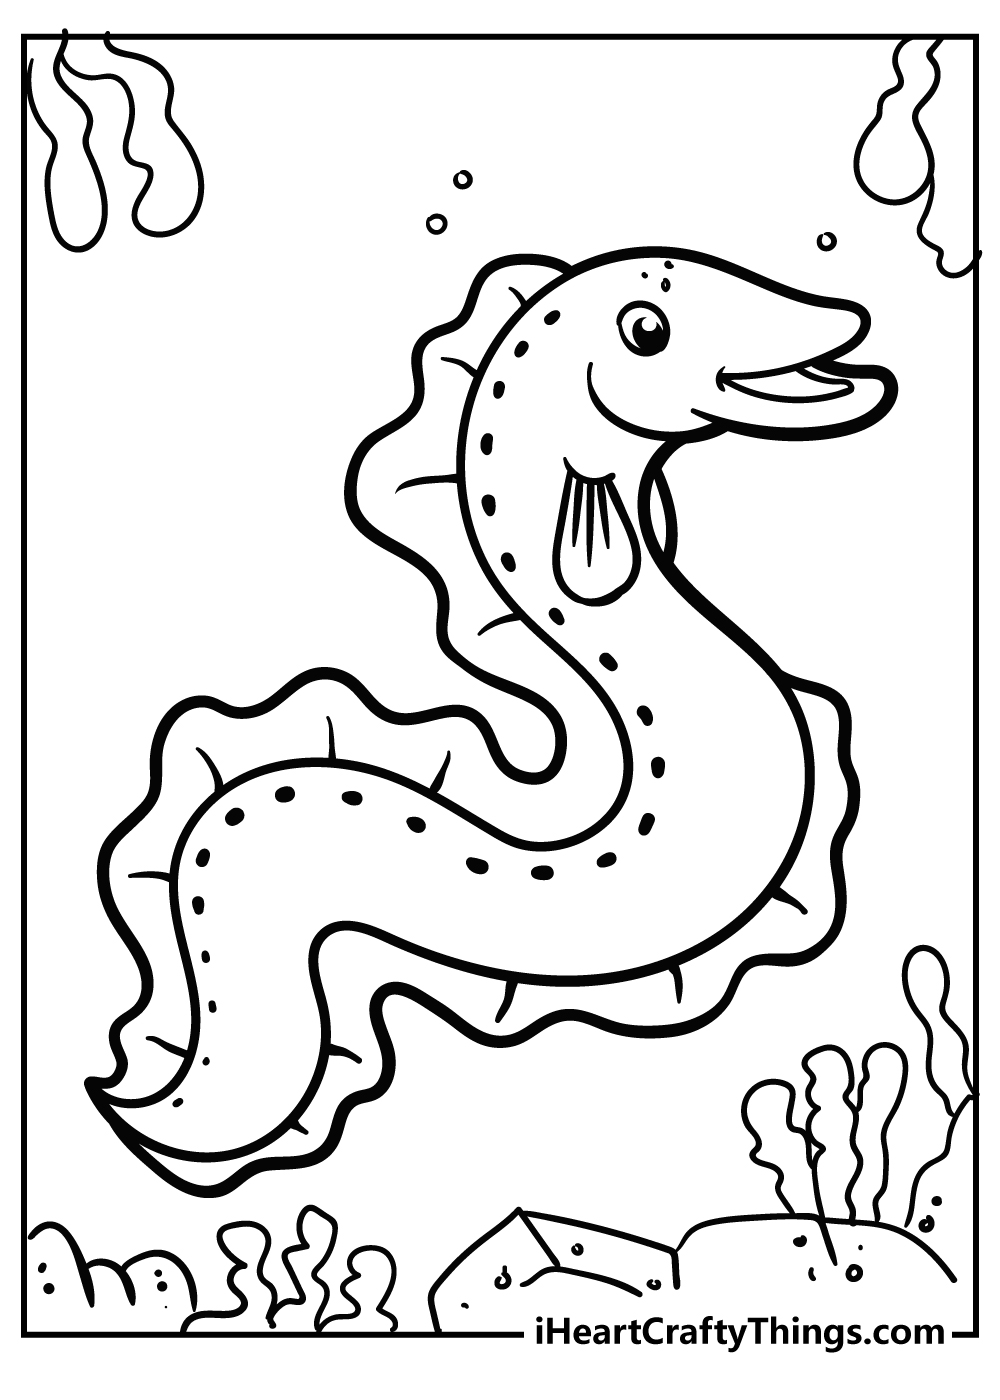 Sea Creature Coloring Pages free pdf download